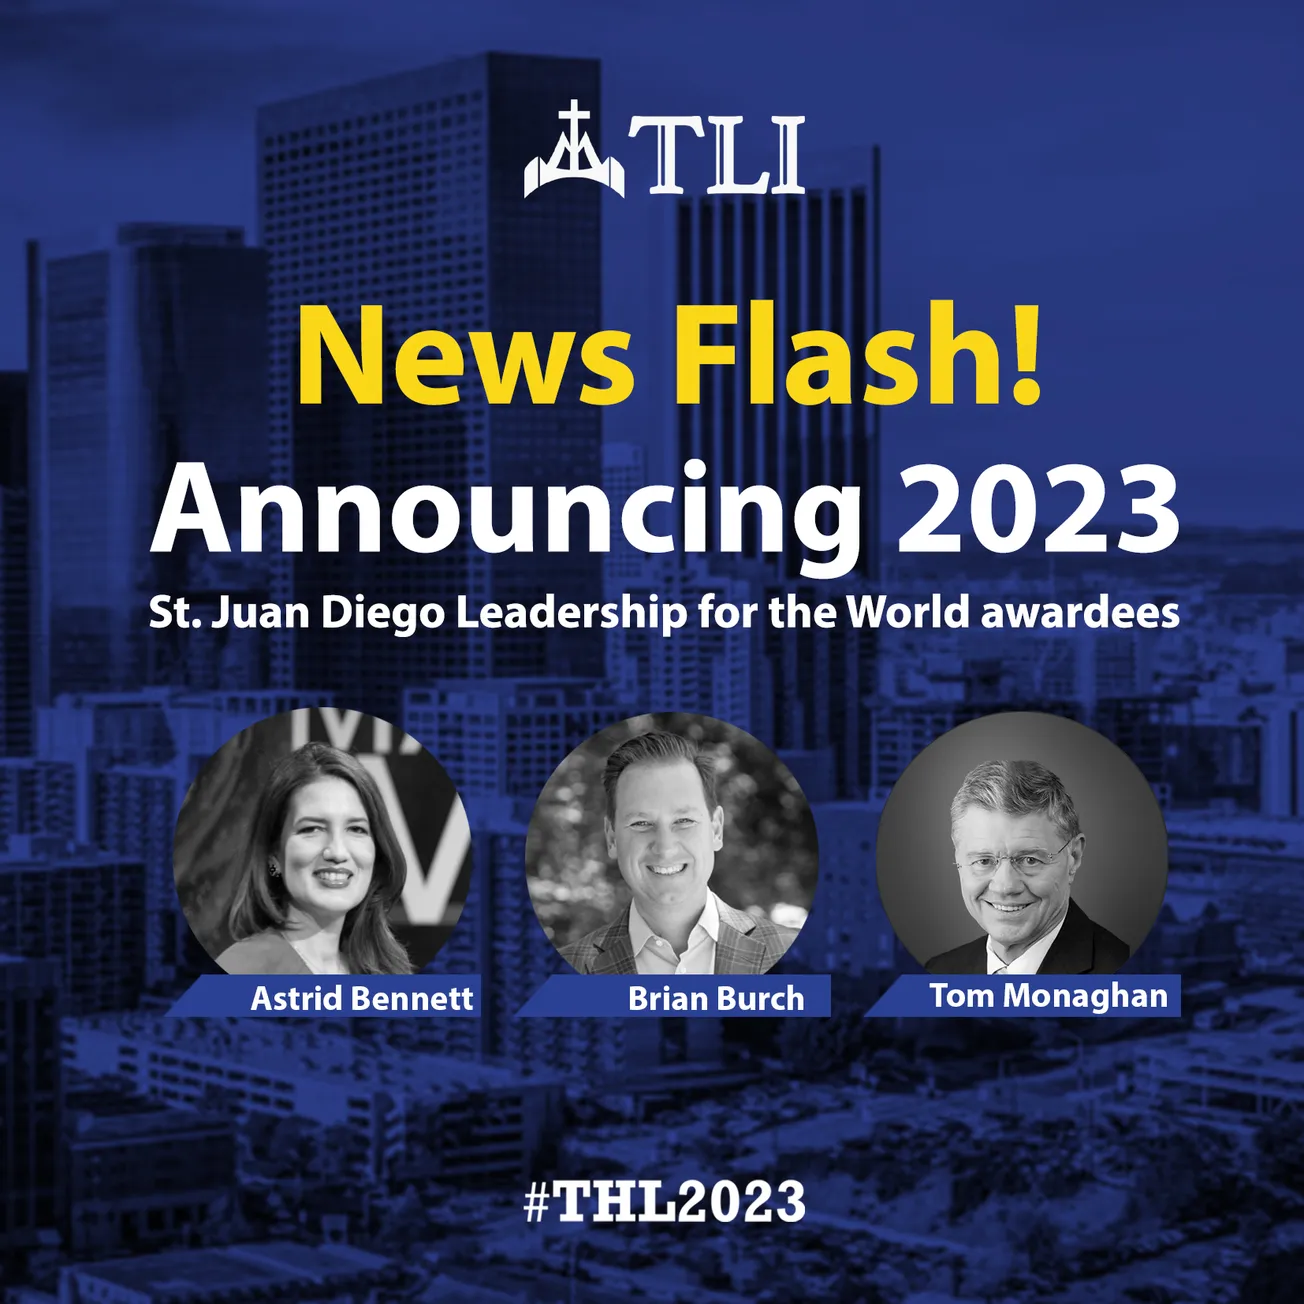 Announcing the 2023 St. Juan Diego Leadership for the World Awardees